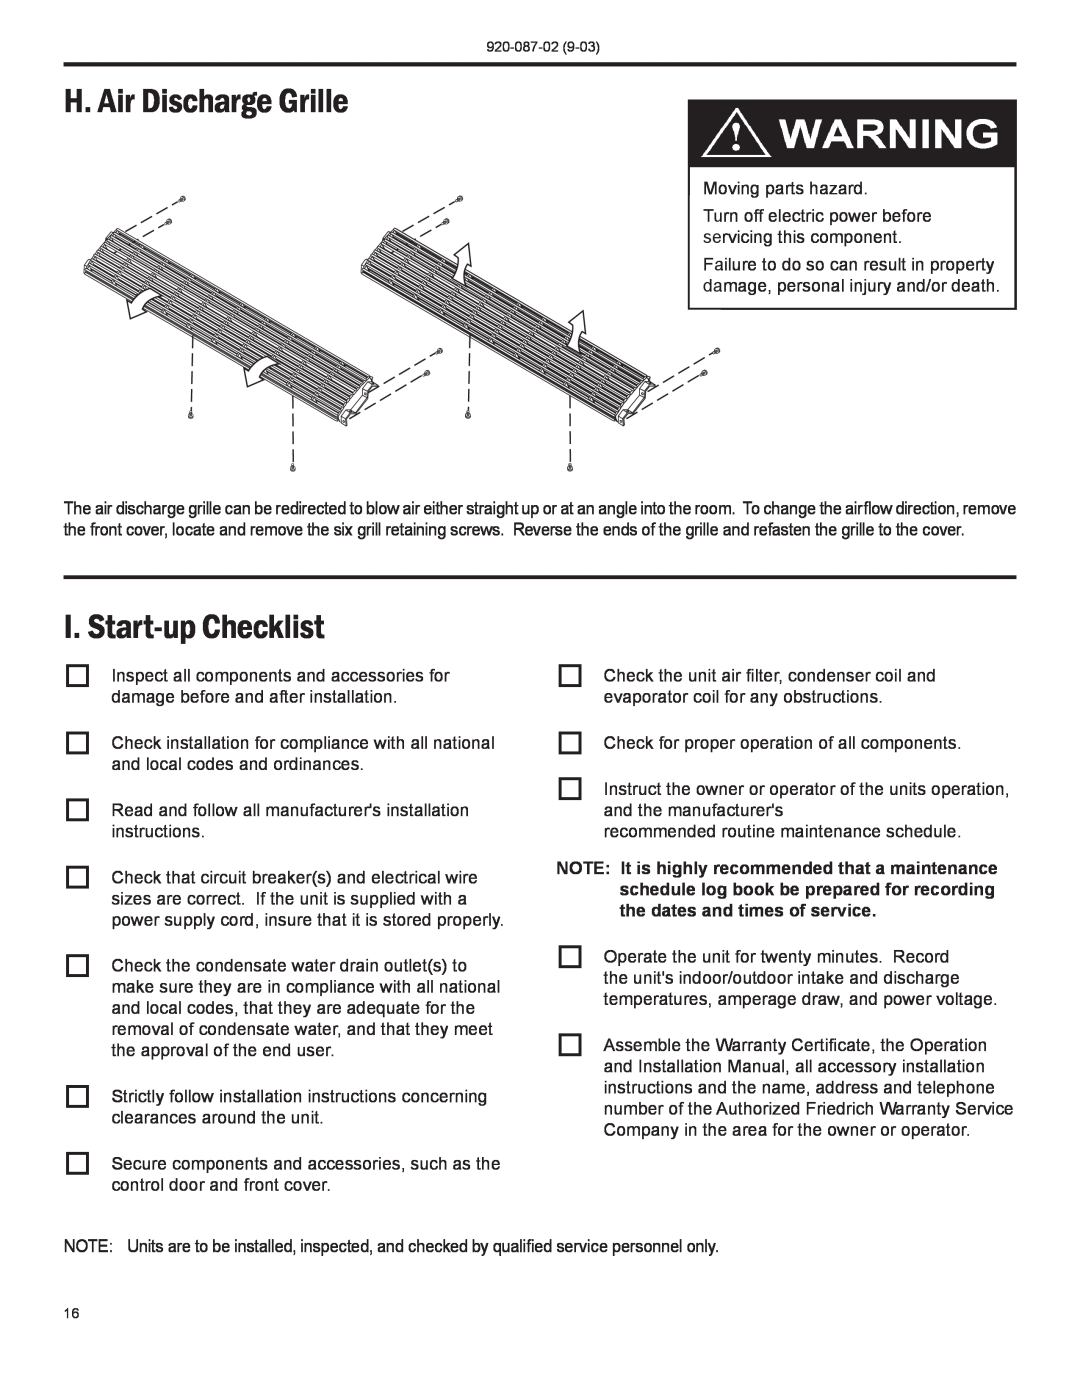 Friedrich PTAC operation manual H. Air Discharge Grille, I. Start-upChecklist 